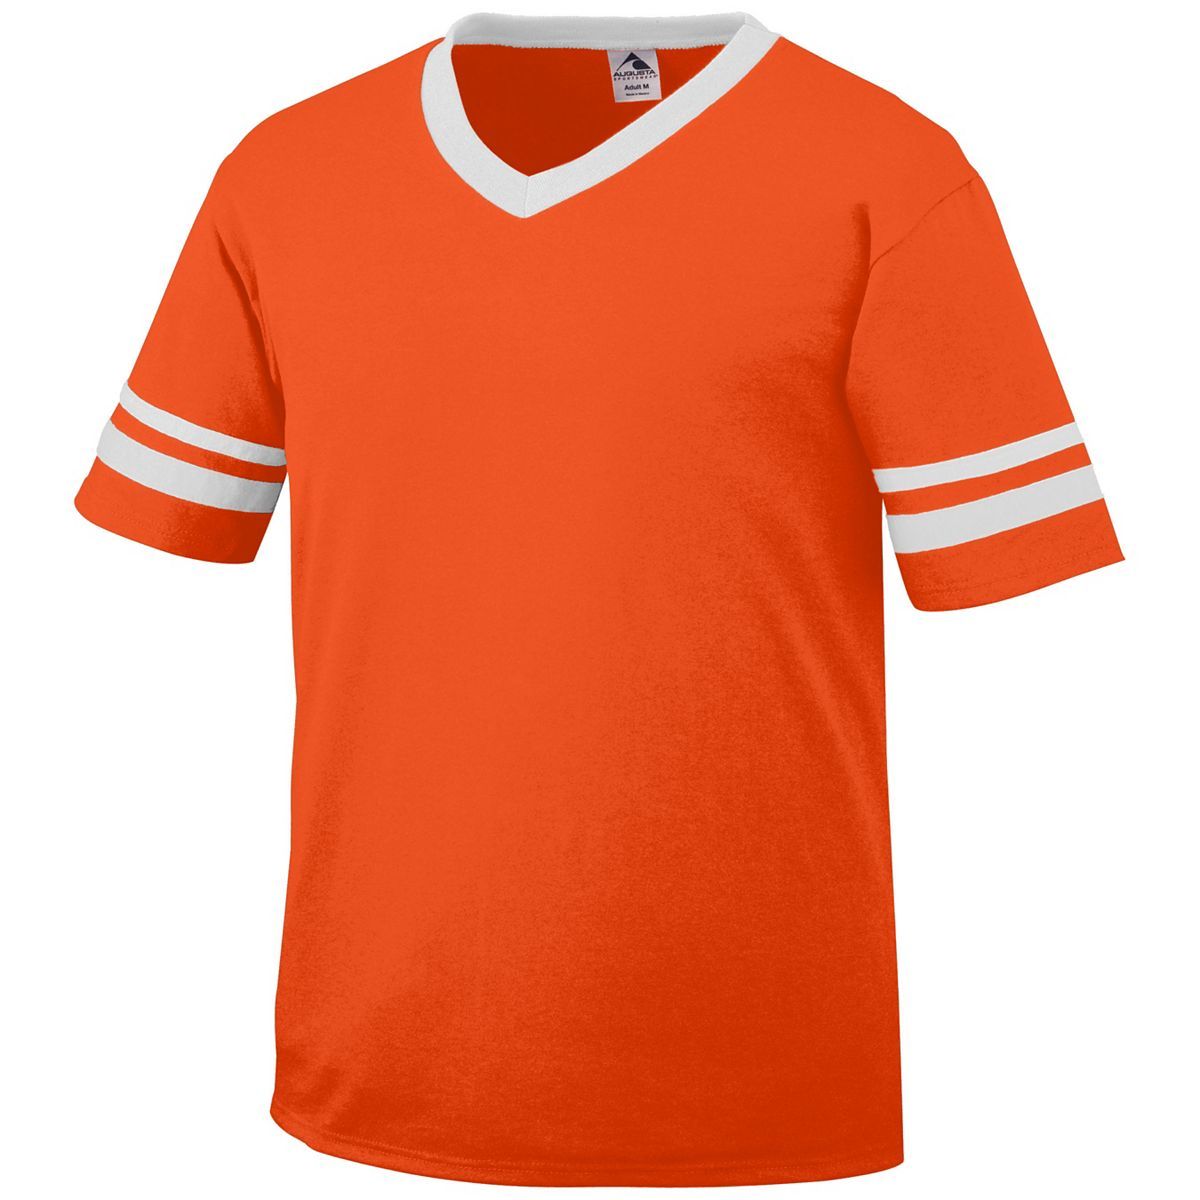 Augusta Sportswear Youth Sleeve Stripe Jersey in Orange/White  -Part of the Youth, Youth-Jersey, Augusta-Products, Shirts product lines at KanaleyCreations.com